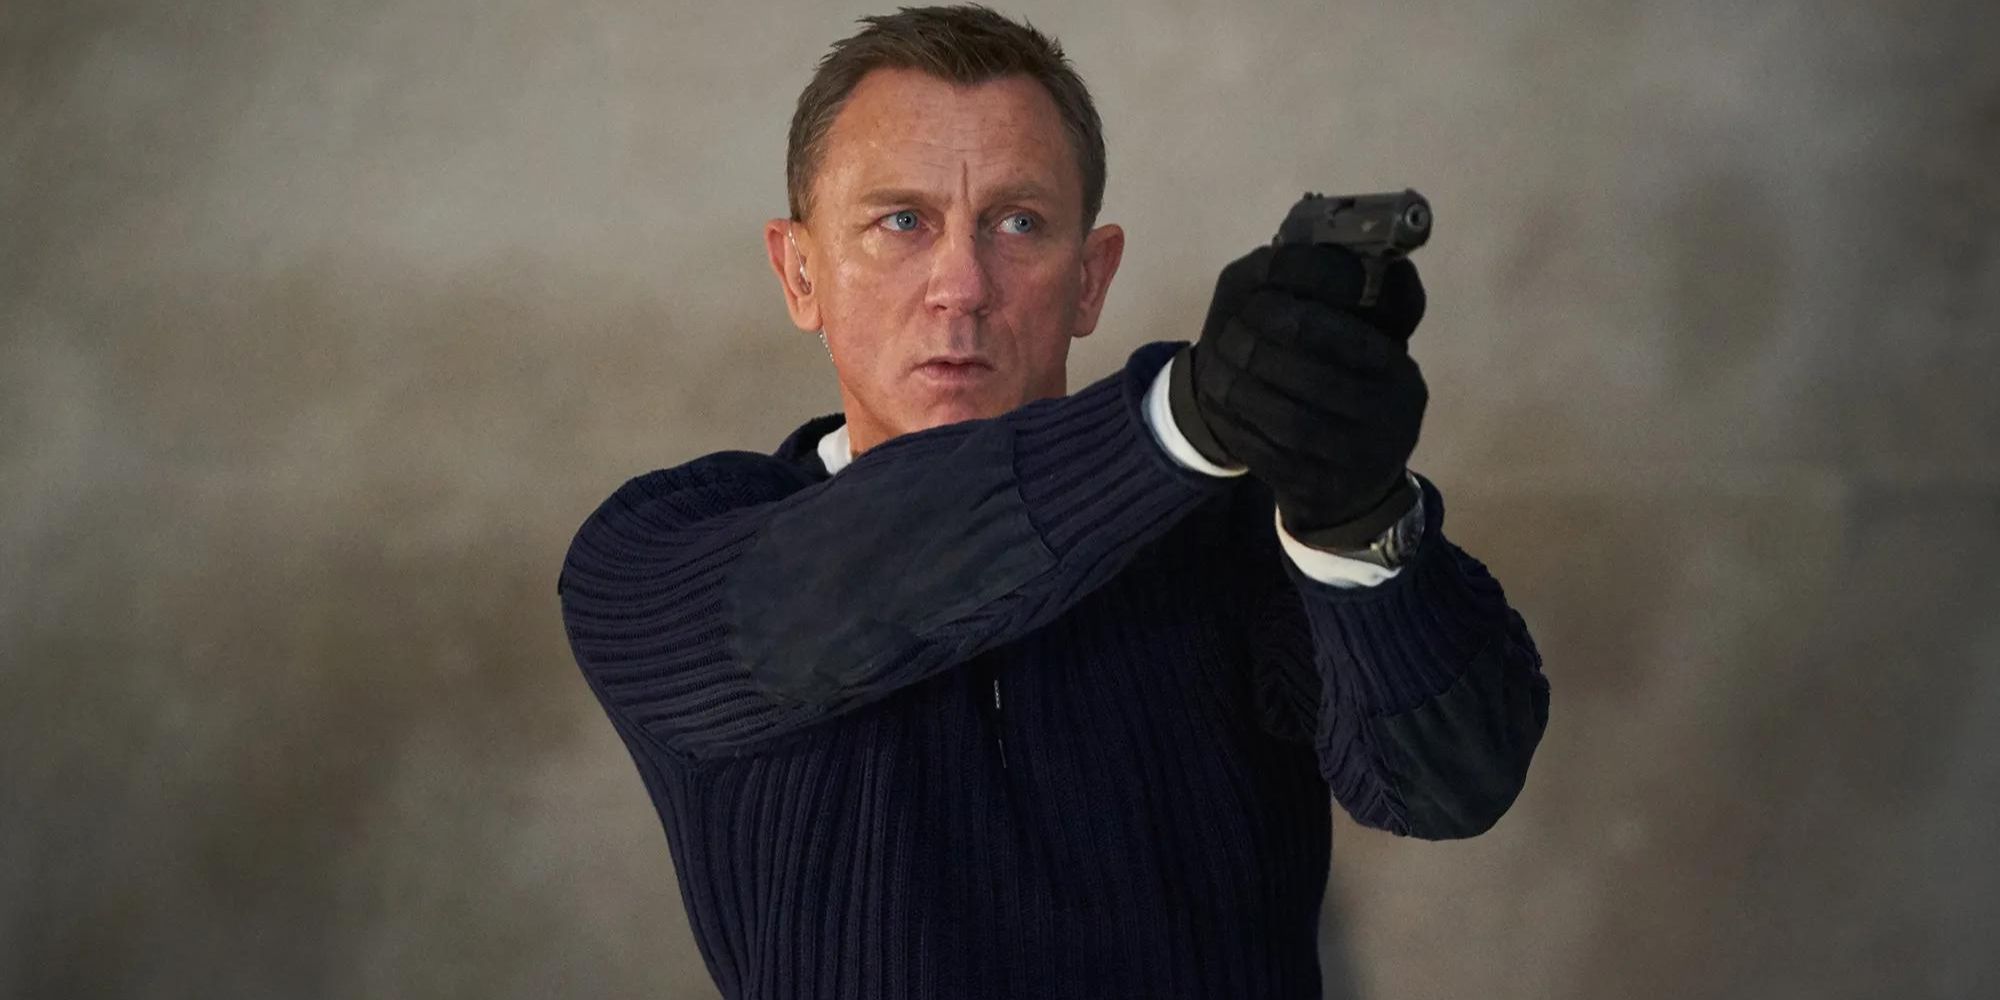 James Bond (Daniel Craig) points a pistol at an invisible enemy in No Time to Die